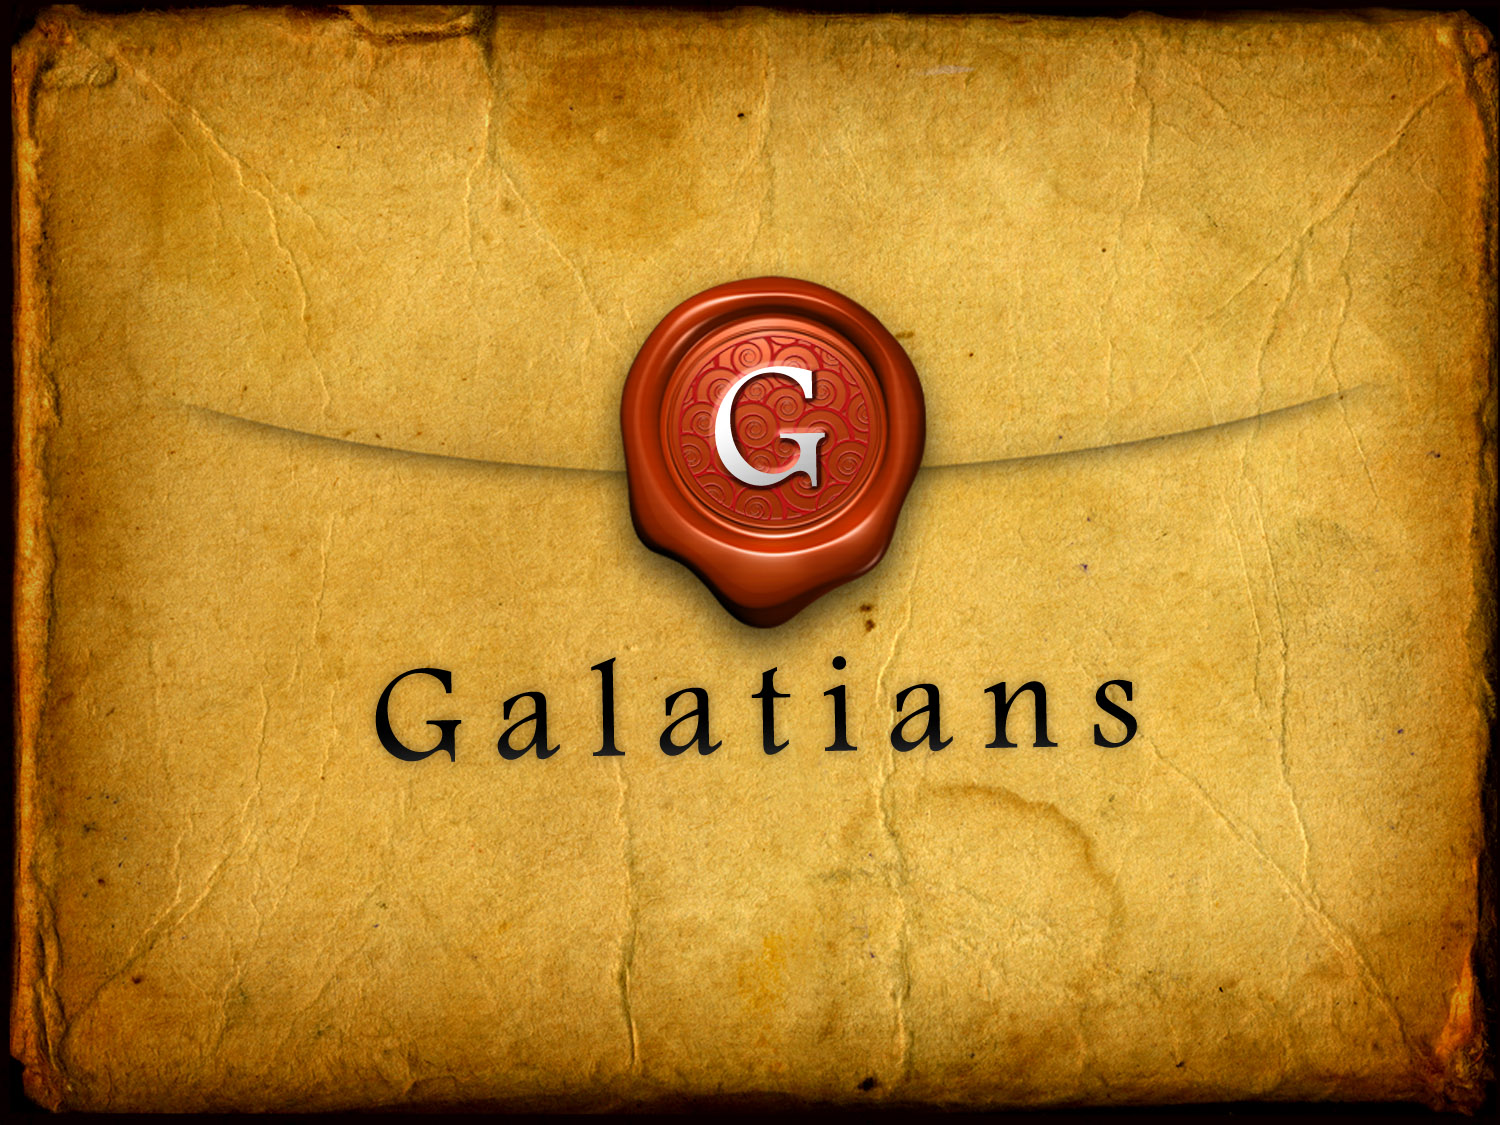 The Book of Galatians 2:1-5